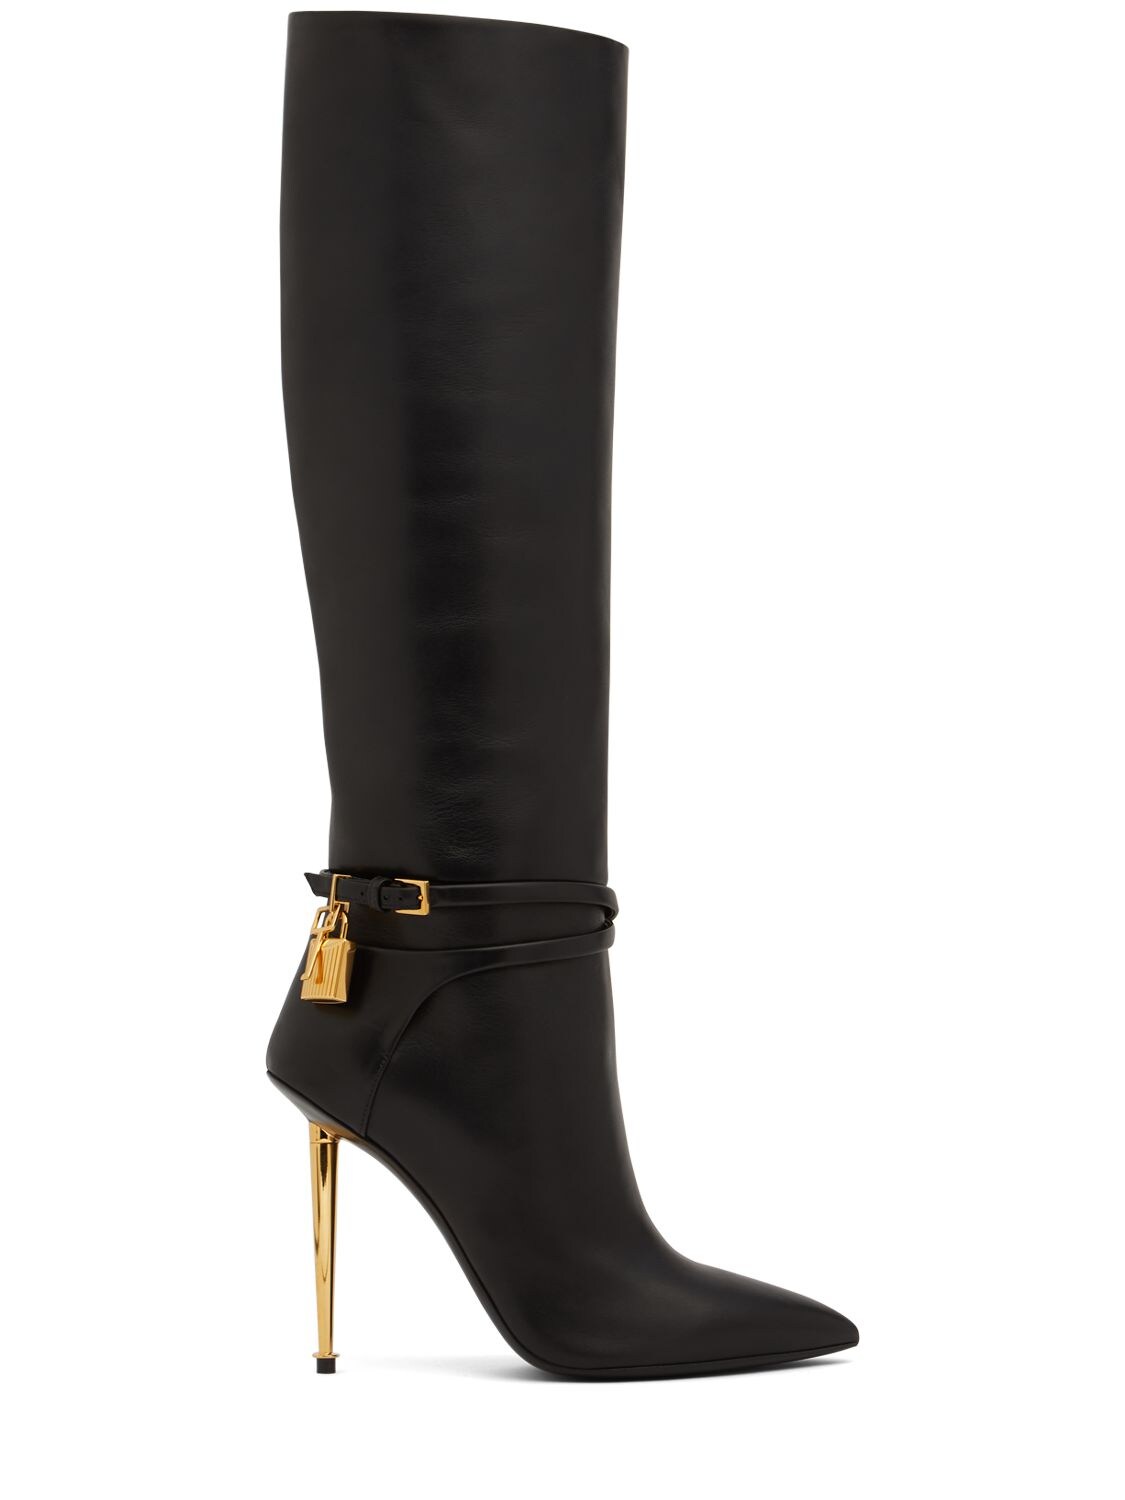 TOM FORD 105MM PADLOCK LEATHER TALL BOOTS